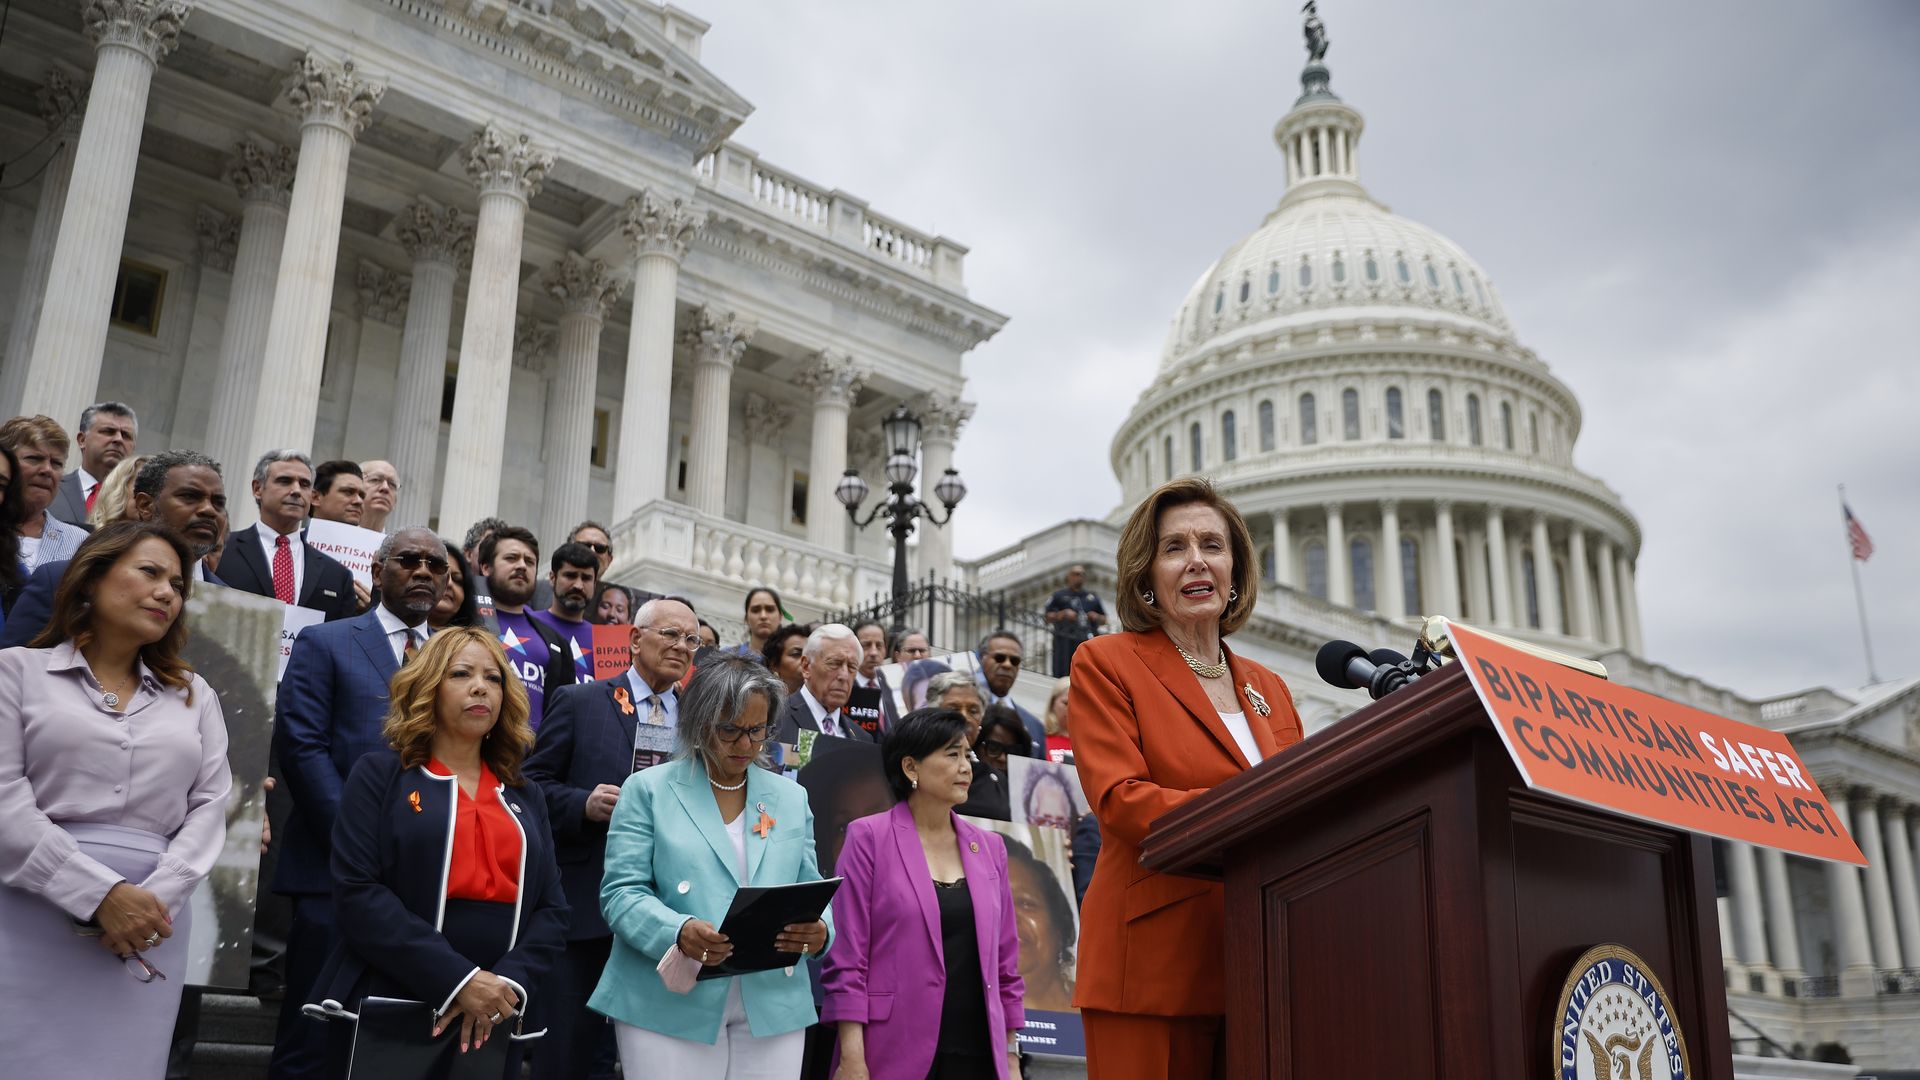 Speaker of the House Nancy Pelosi (D-CA) delivers remarks as she joins fellow Democrats for a rally before voting on the Bipartisan Safer Communities Act in outside the U.S. Capitol on June 24, 2022.